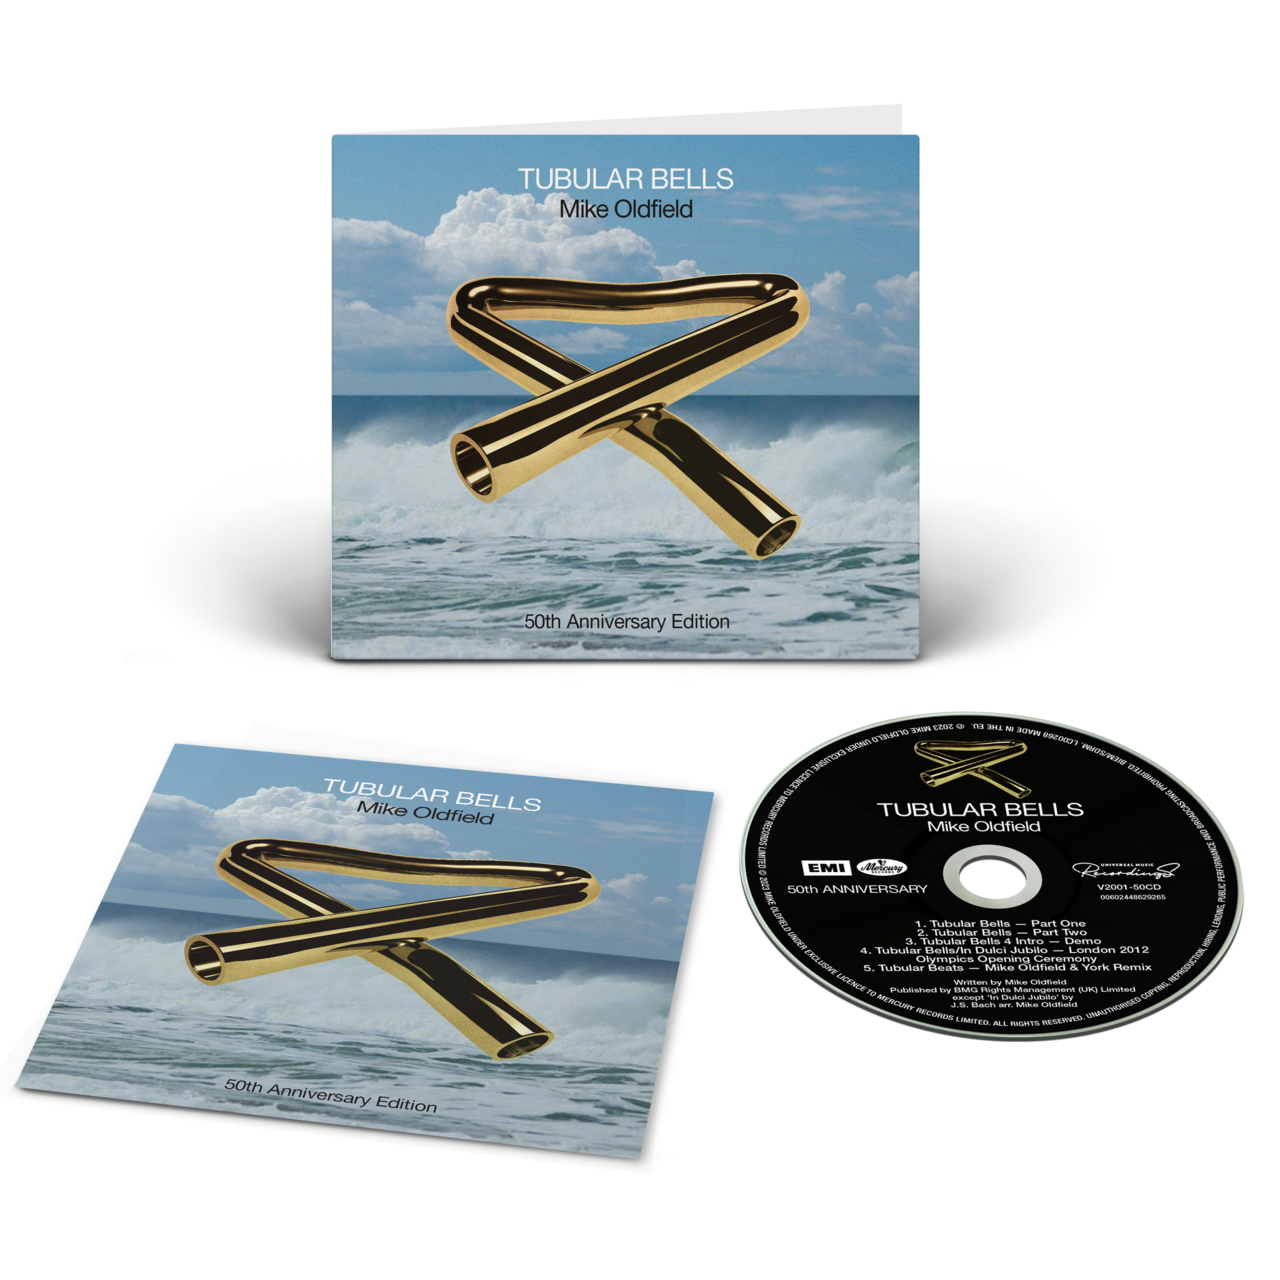 Mike Oldfield - Tubular Bells (50th Anniversary Edition): CD